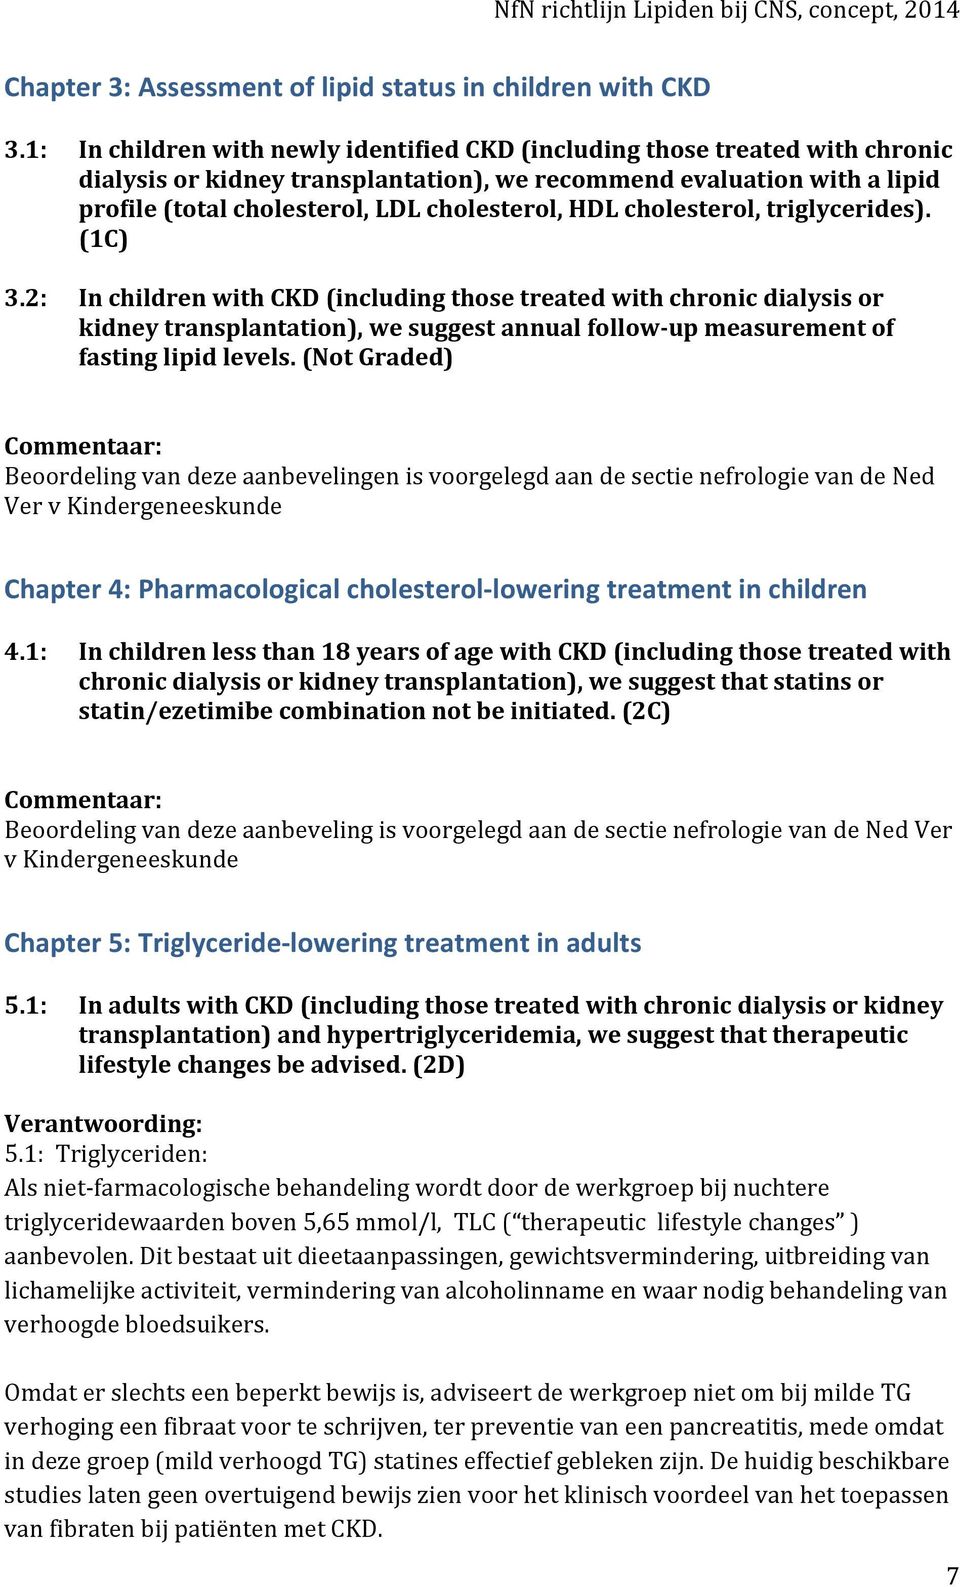 cholesterol, triglycerides). (1C) 3.2: In children with CKD (including those treated with chronic dialysis or kidney transplantation), we suggest annual follow-up measurement of fasting lipid levels.